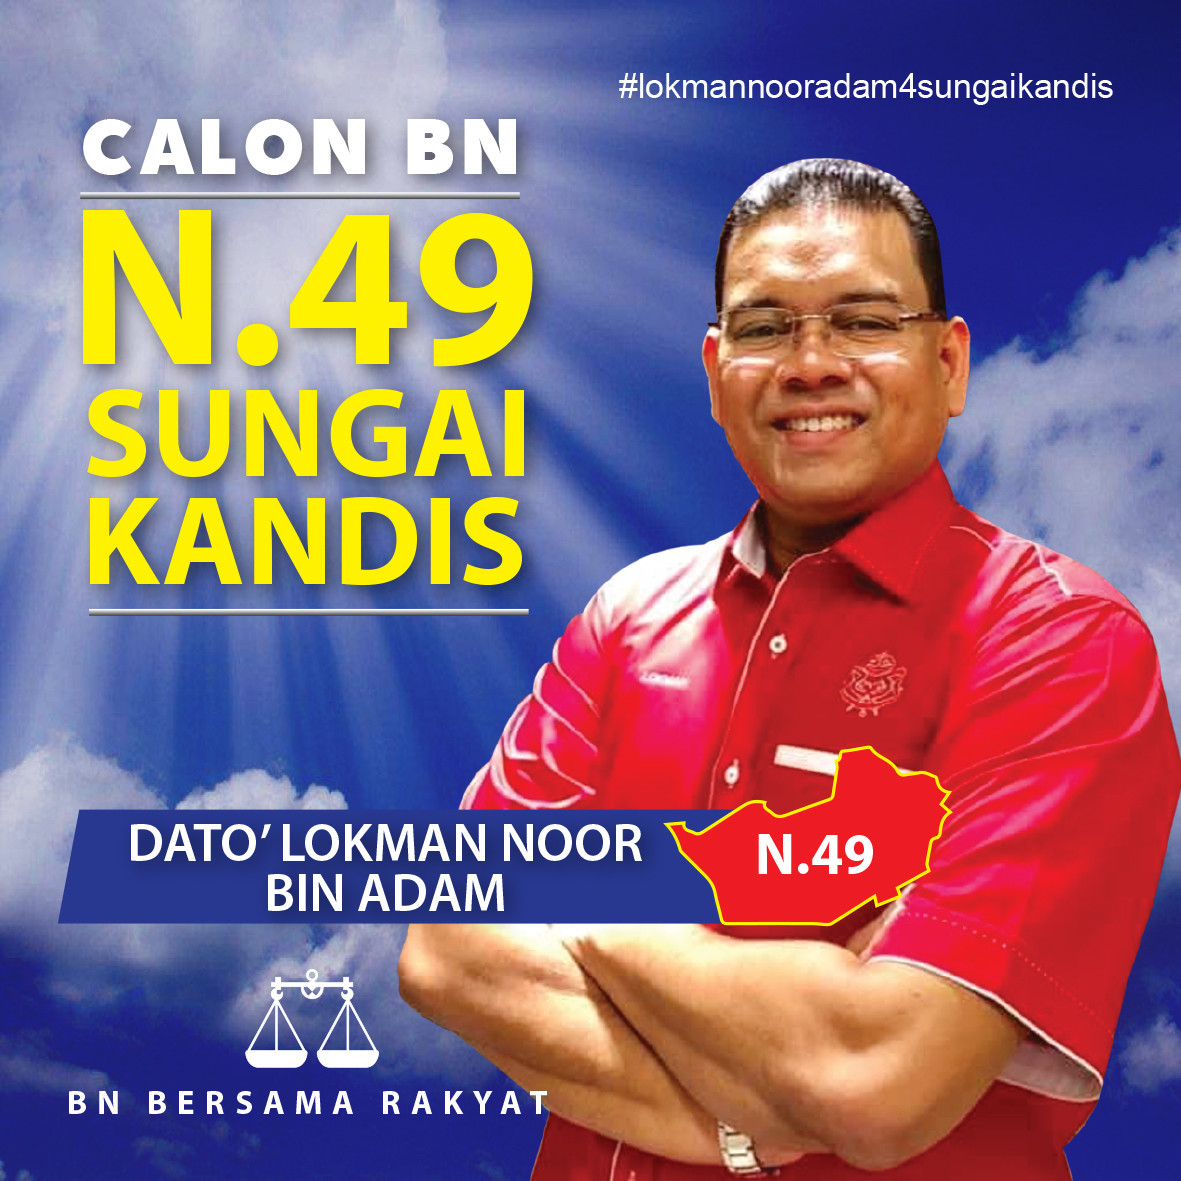 Kandis guy win the by-election? No, he lost. Image from UMNO Online